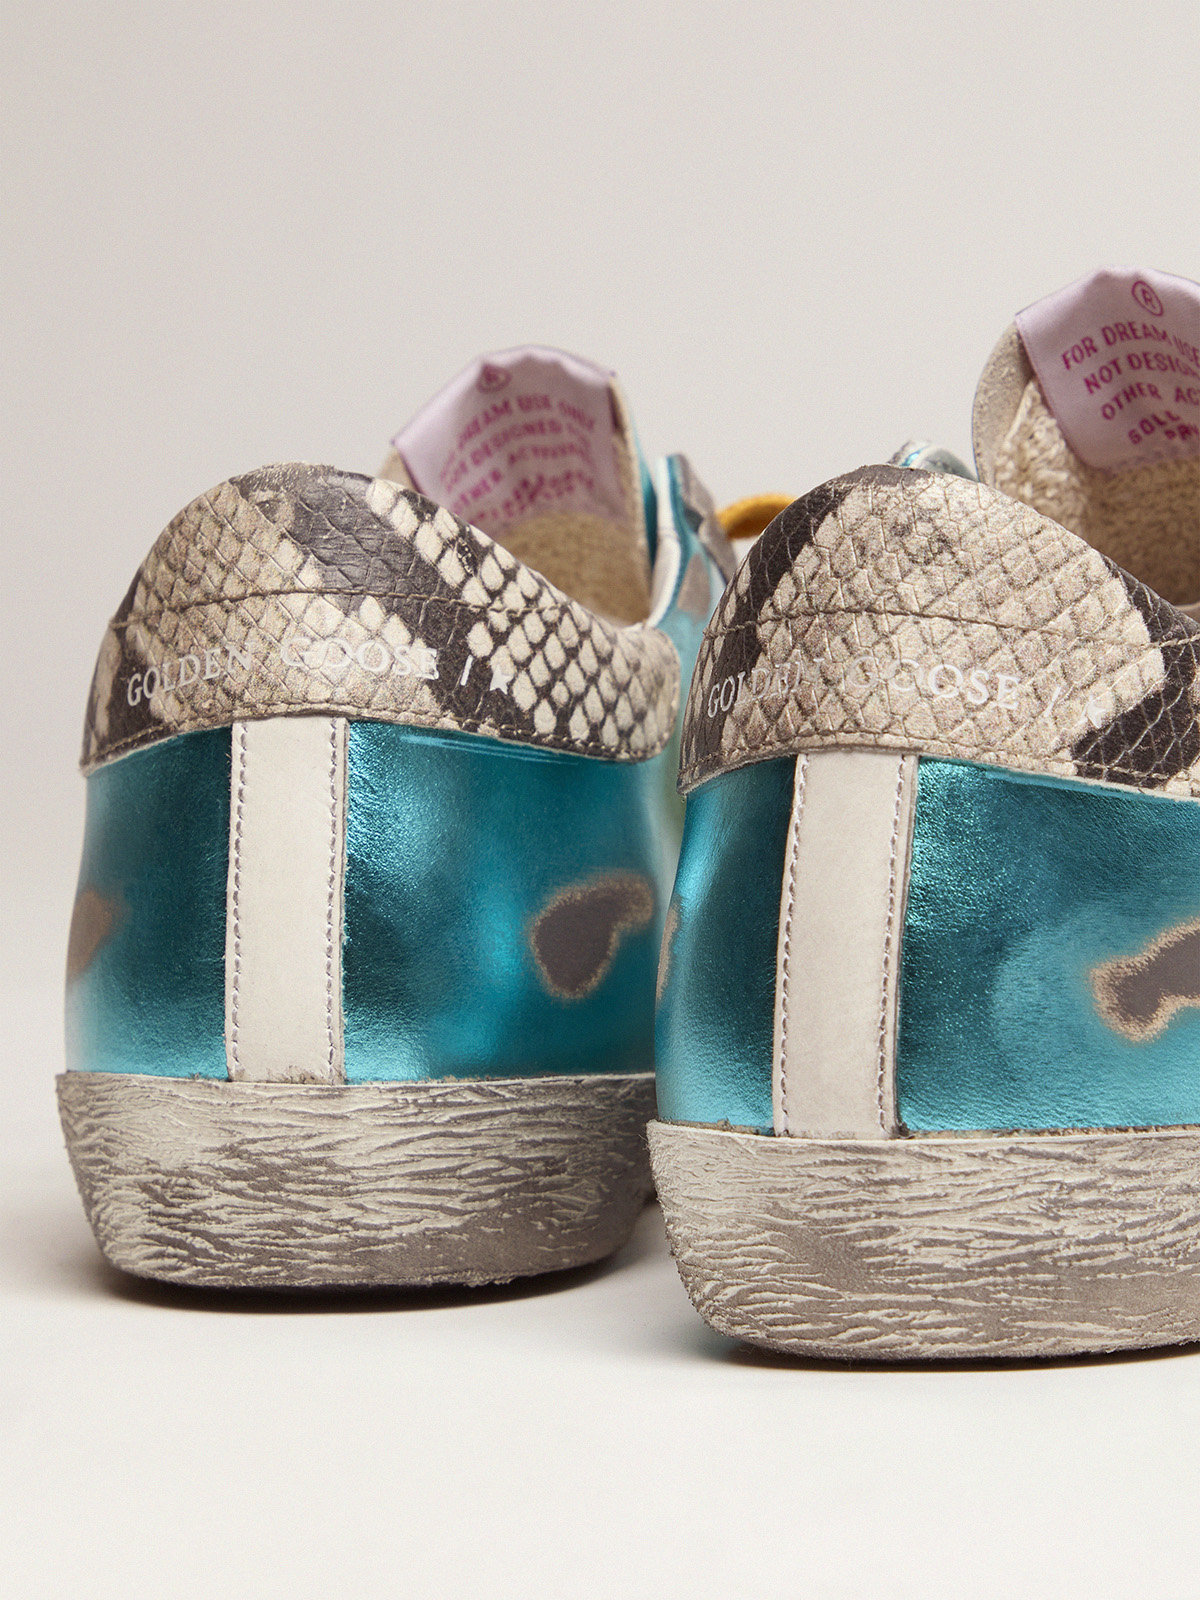 Turquoise green laminated Super-Star LTD sneakers with snake-print heel tab  | Golden Goose